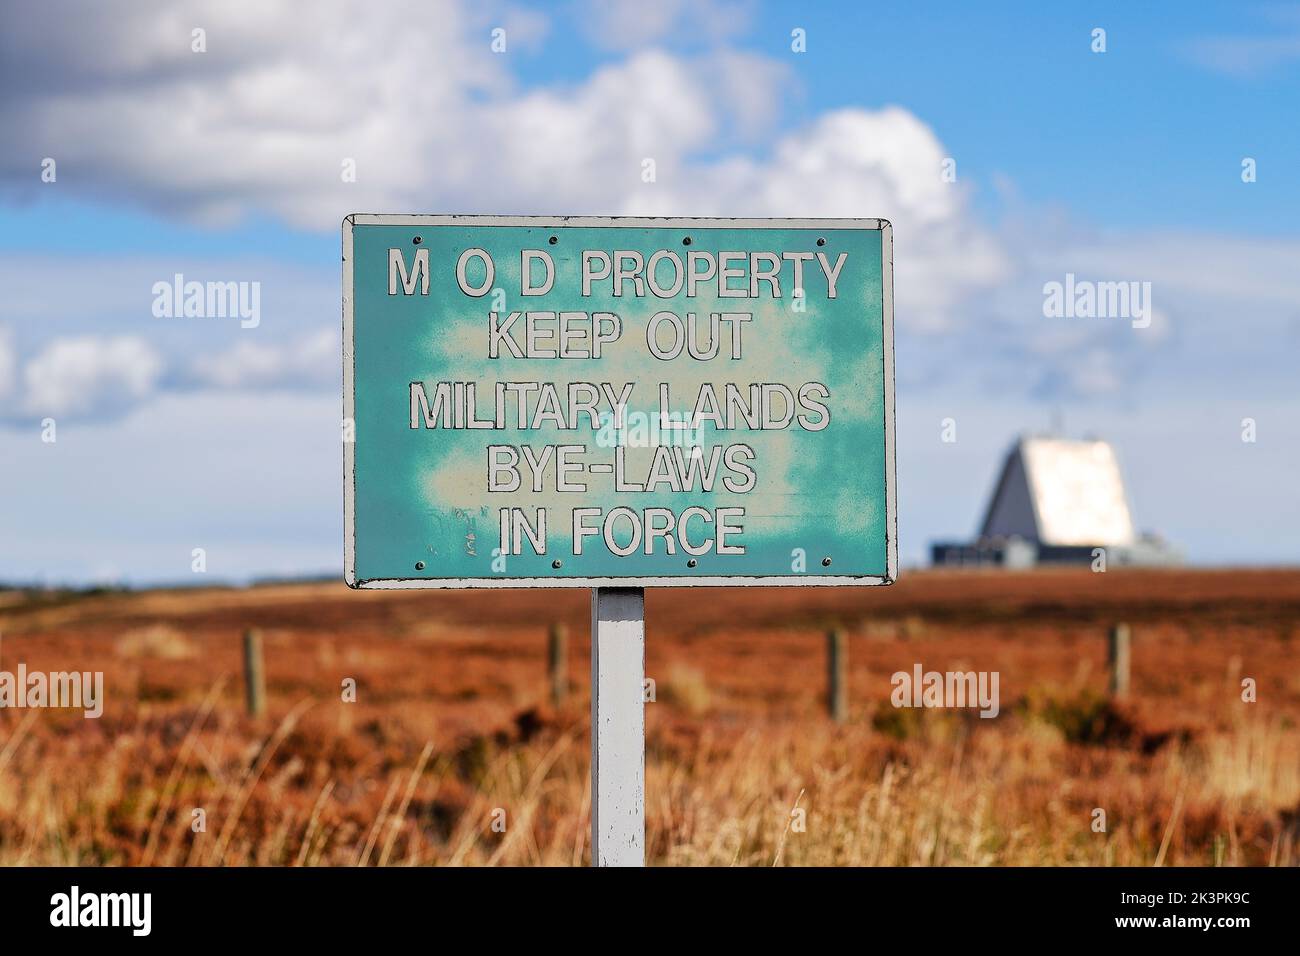 RAF Fylingdales Ballistic Missile Early Warning Station (BMEWS) on the North Yorkshire Moors near Whitby Stock Photo